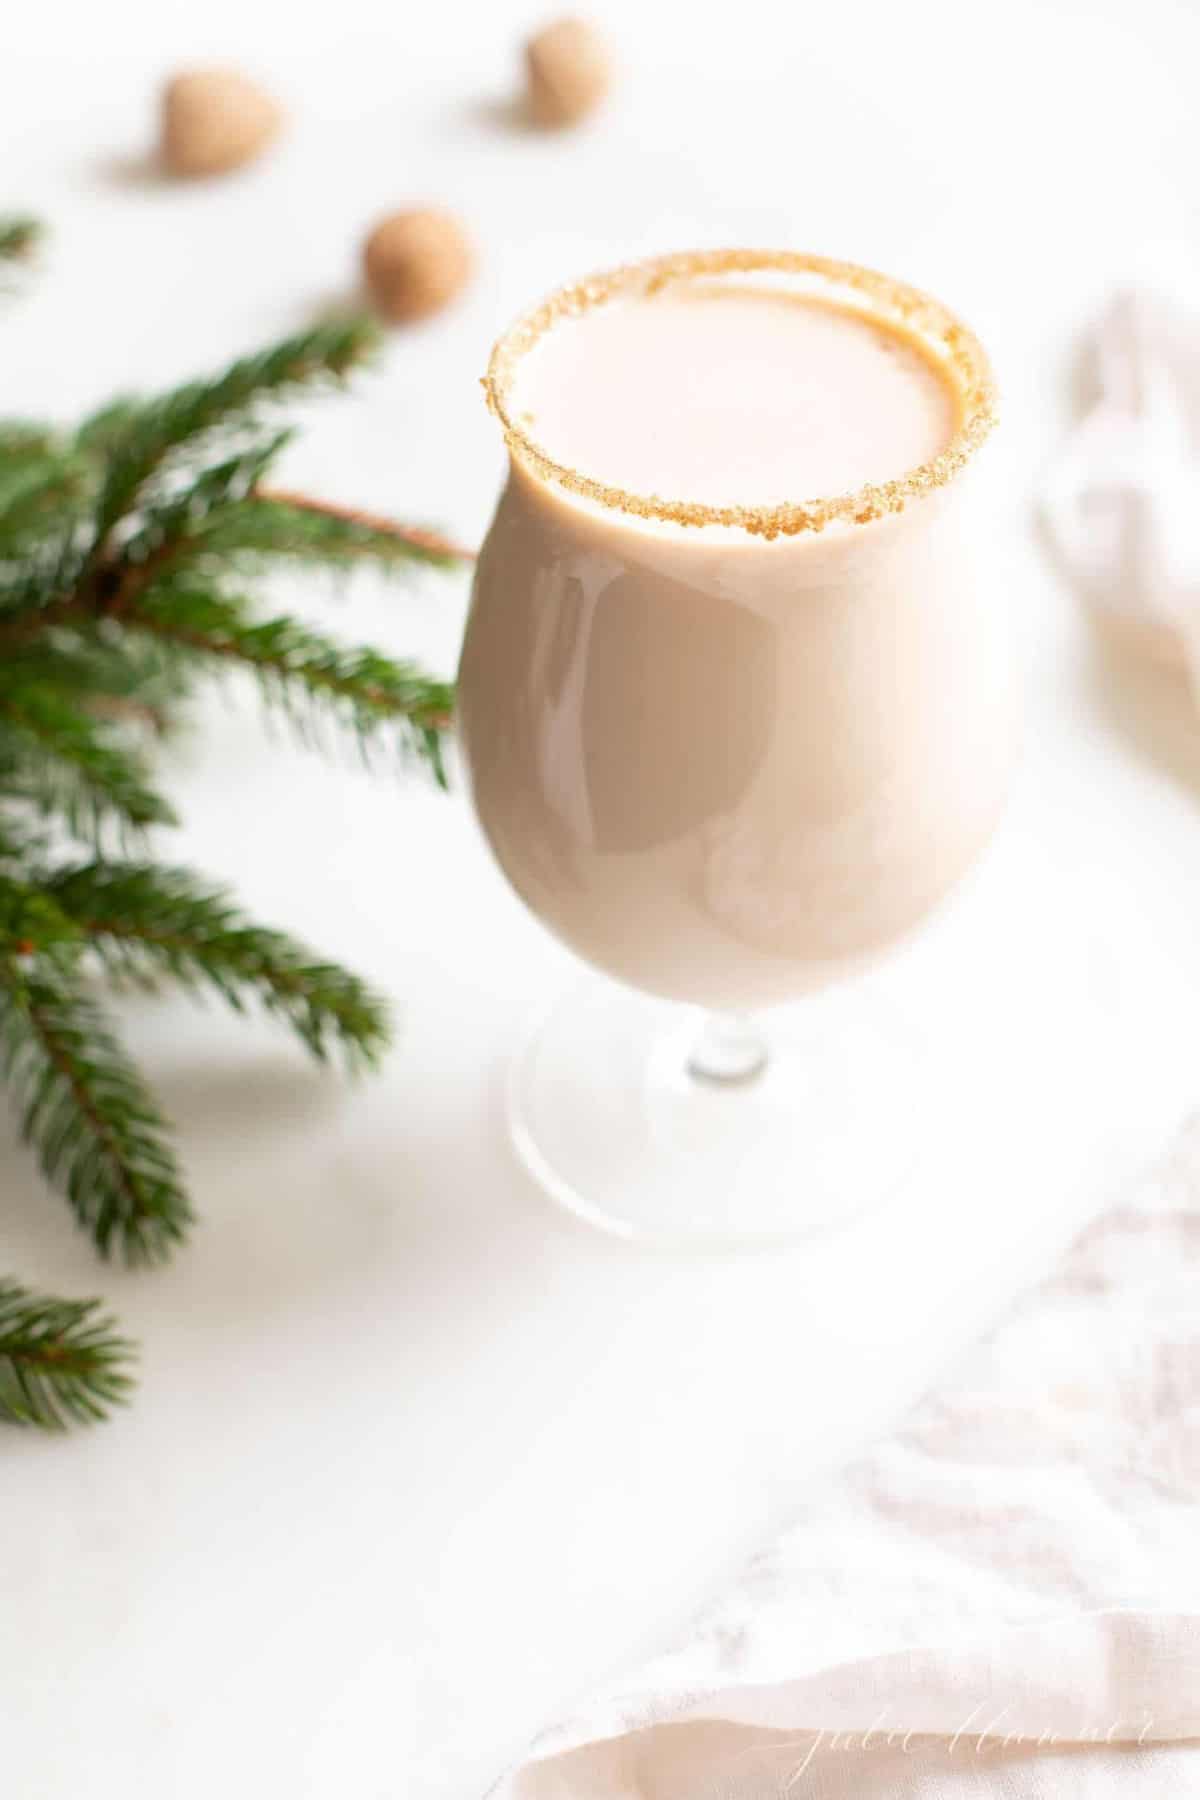 A clear glass with an oatmeal cookie drink, hazelnuts and greenery to the side.